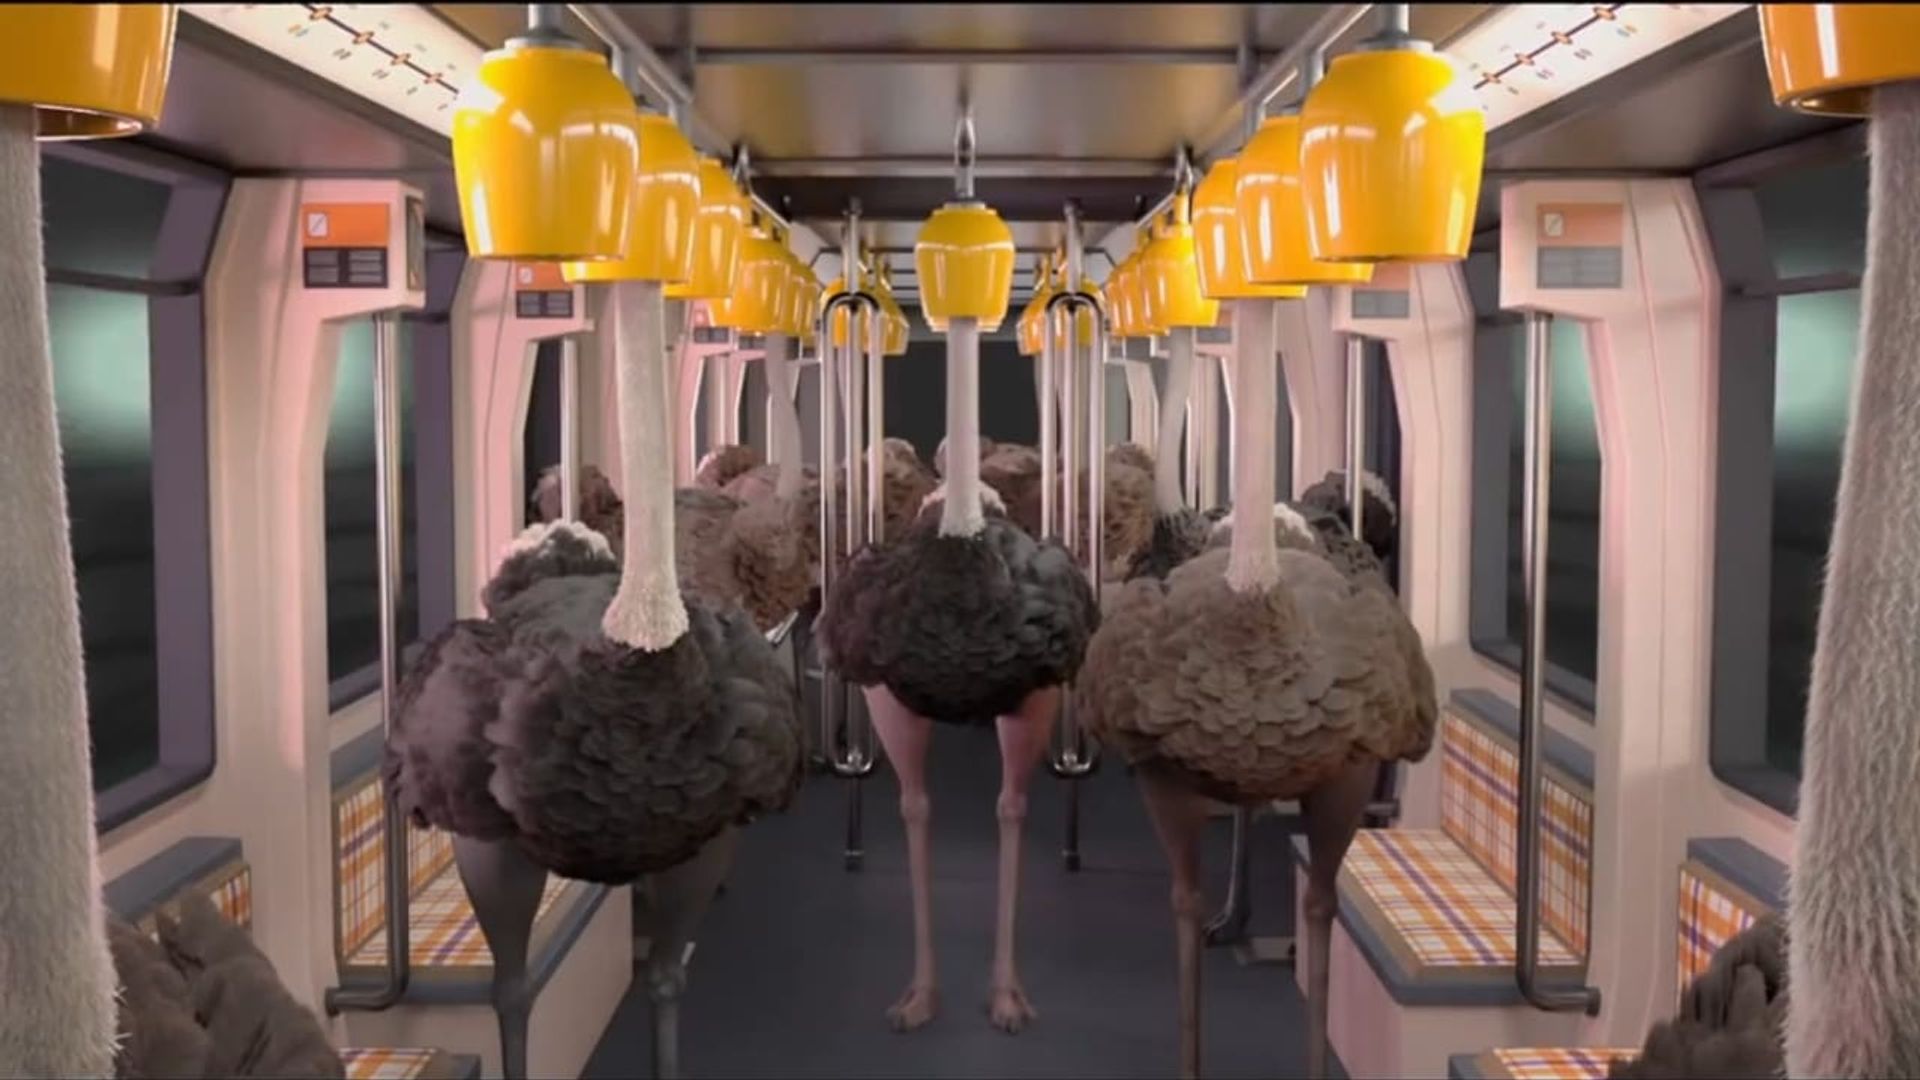 The Ostrich Politic background